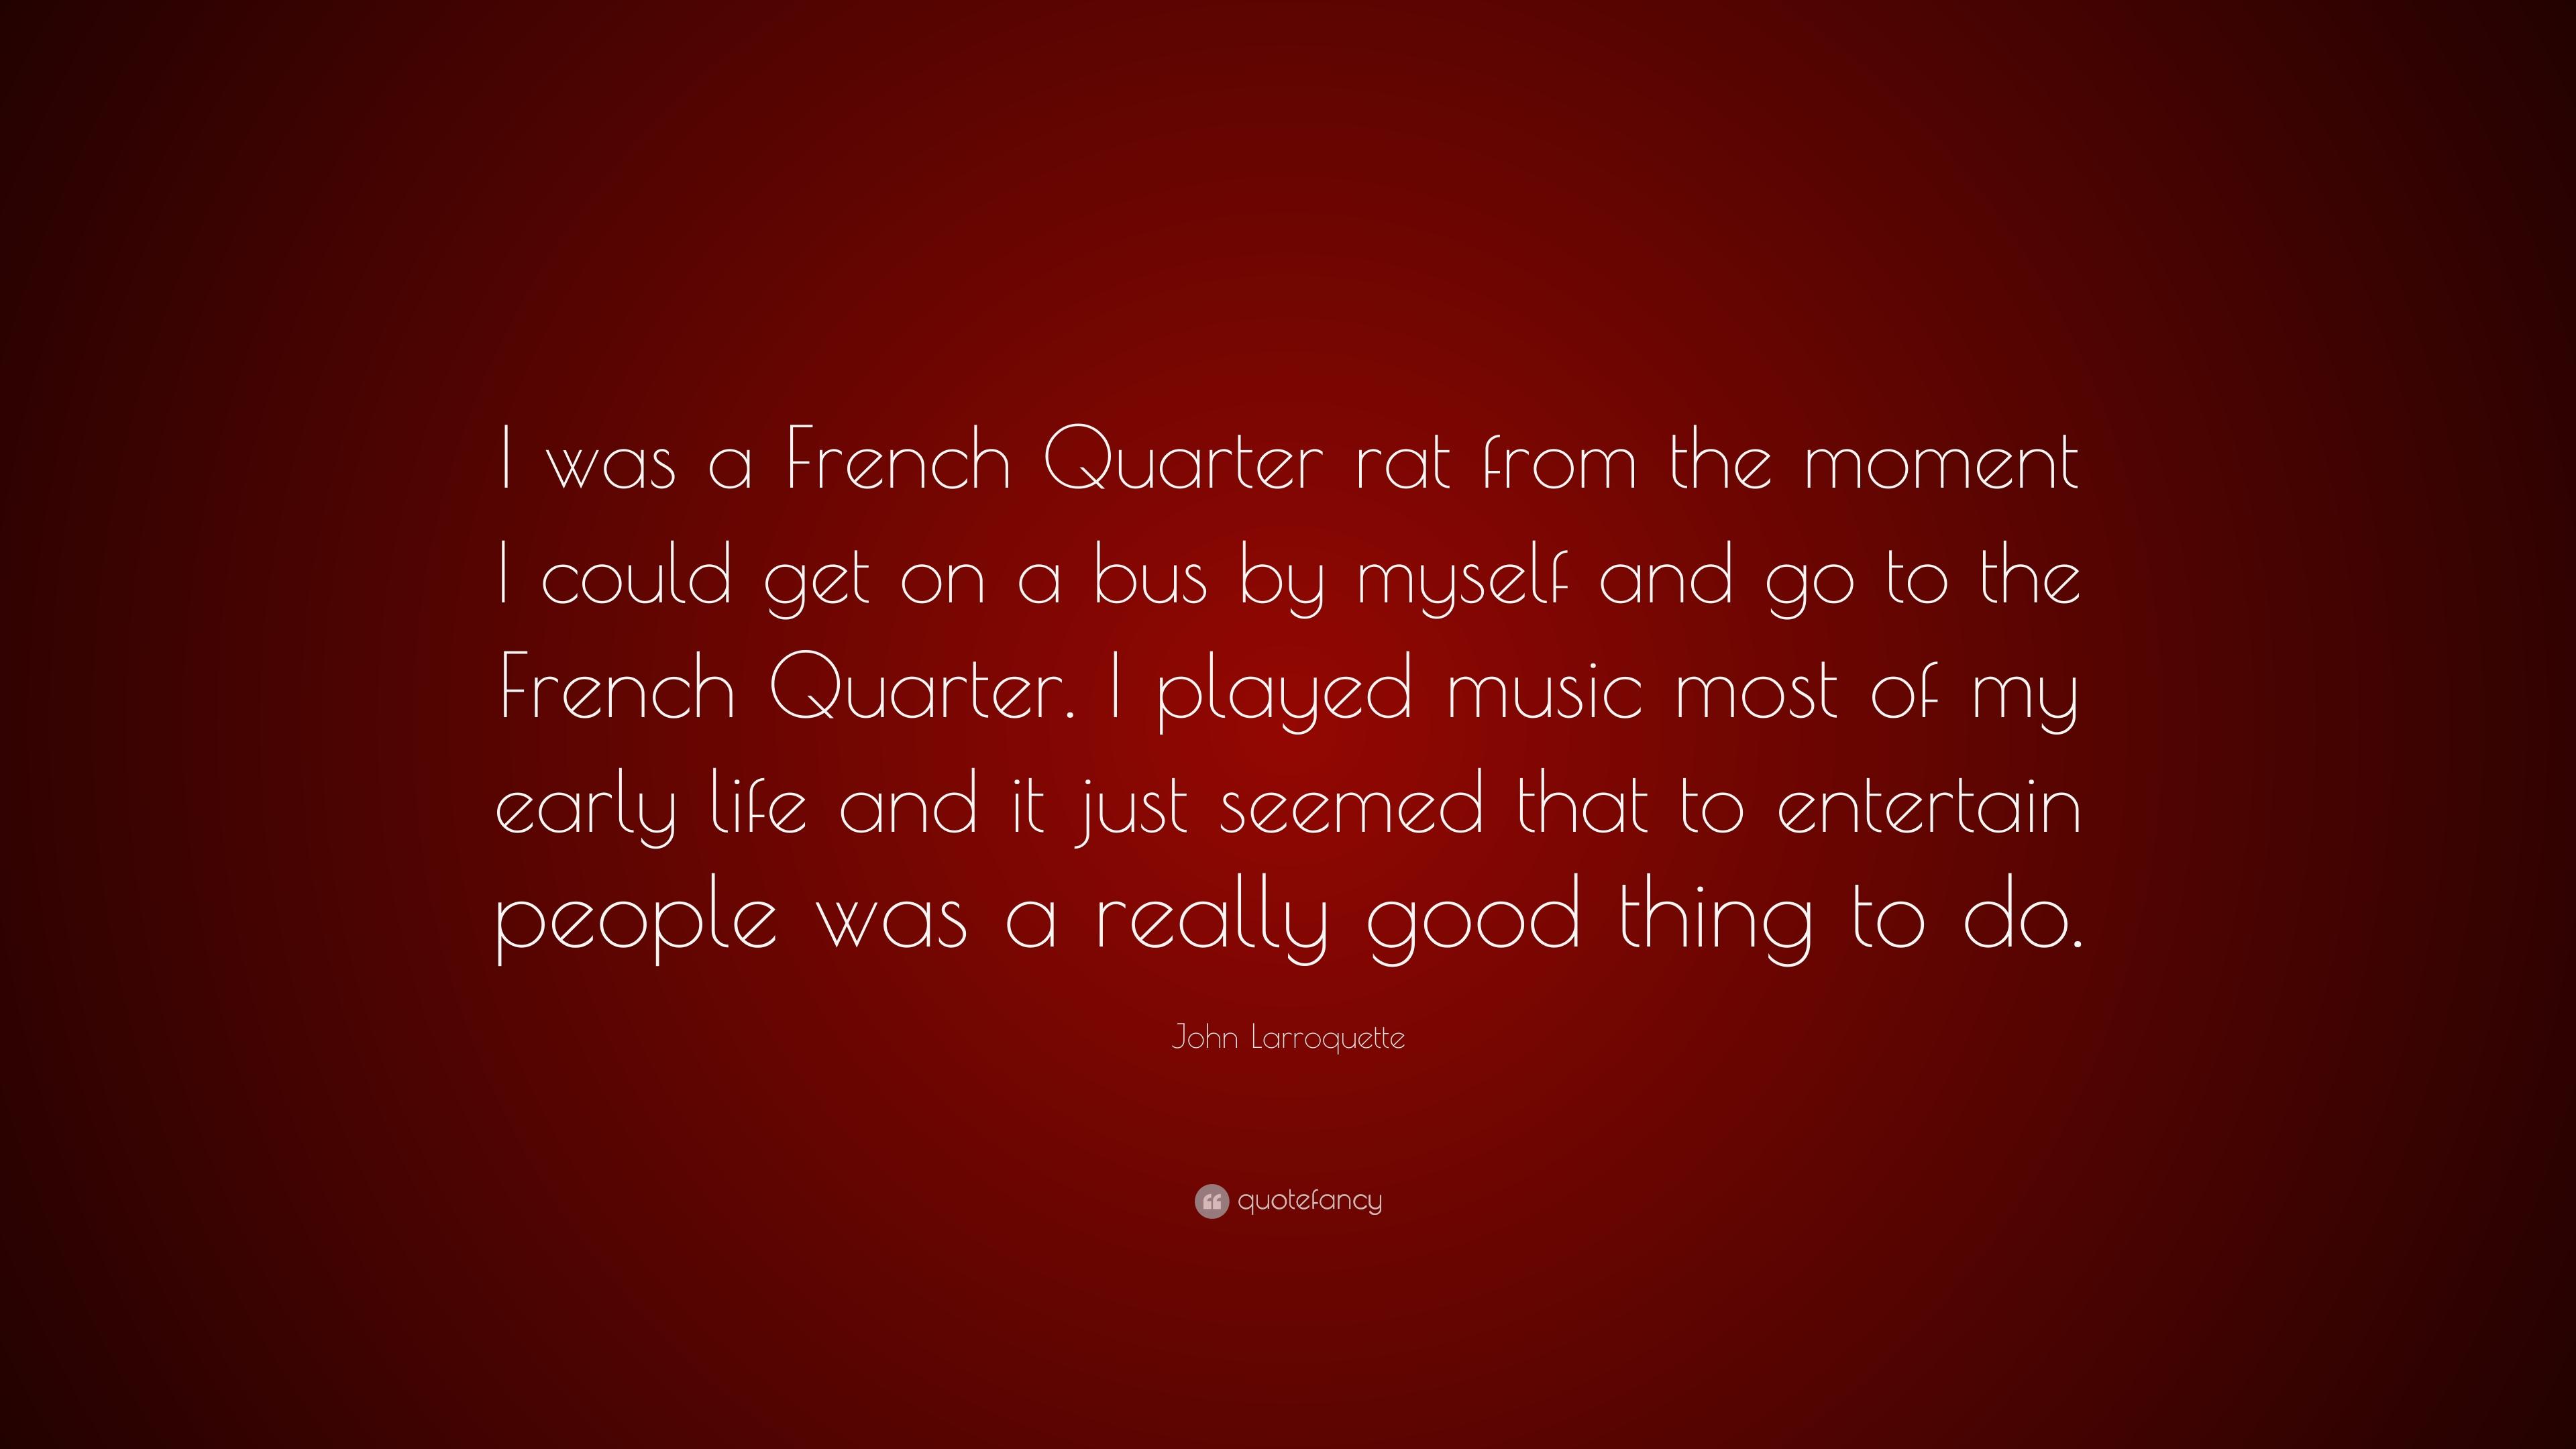 John Larroquette Quote: “I was a French Quarter rat from the moment